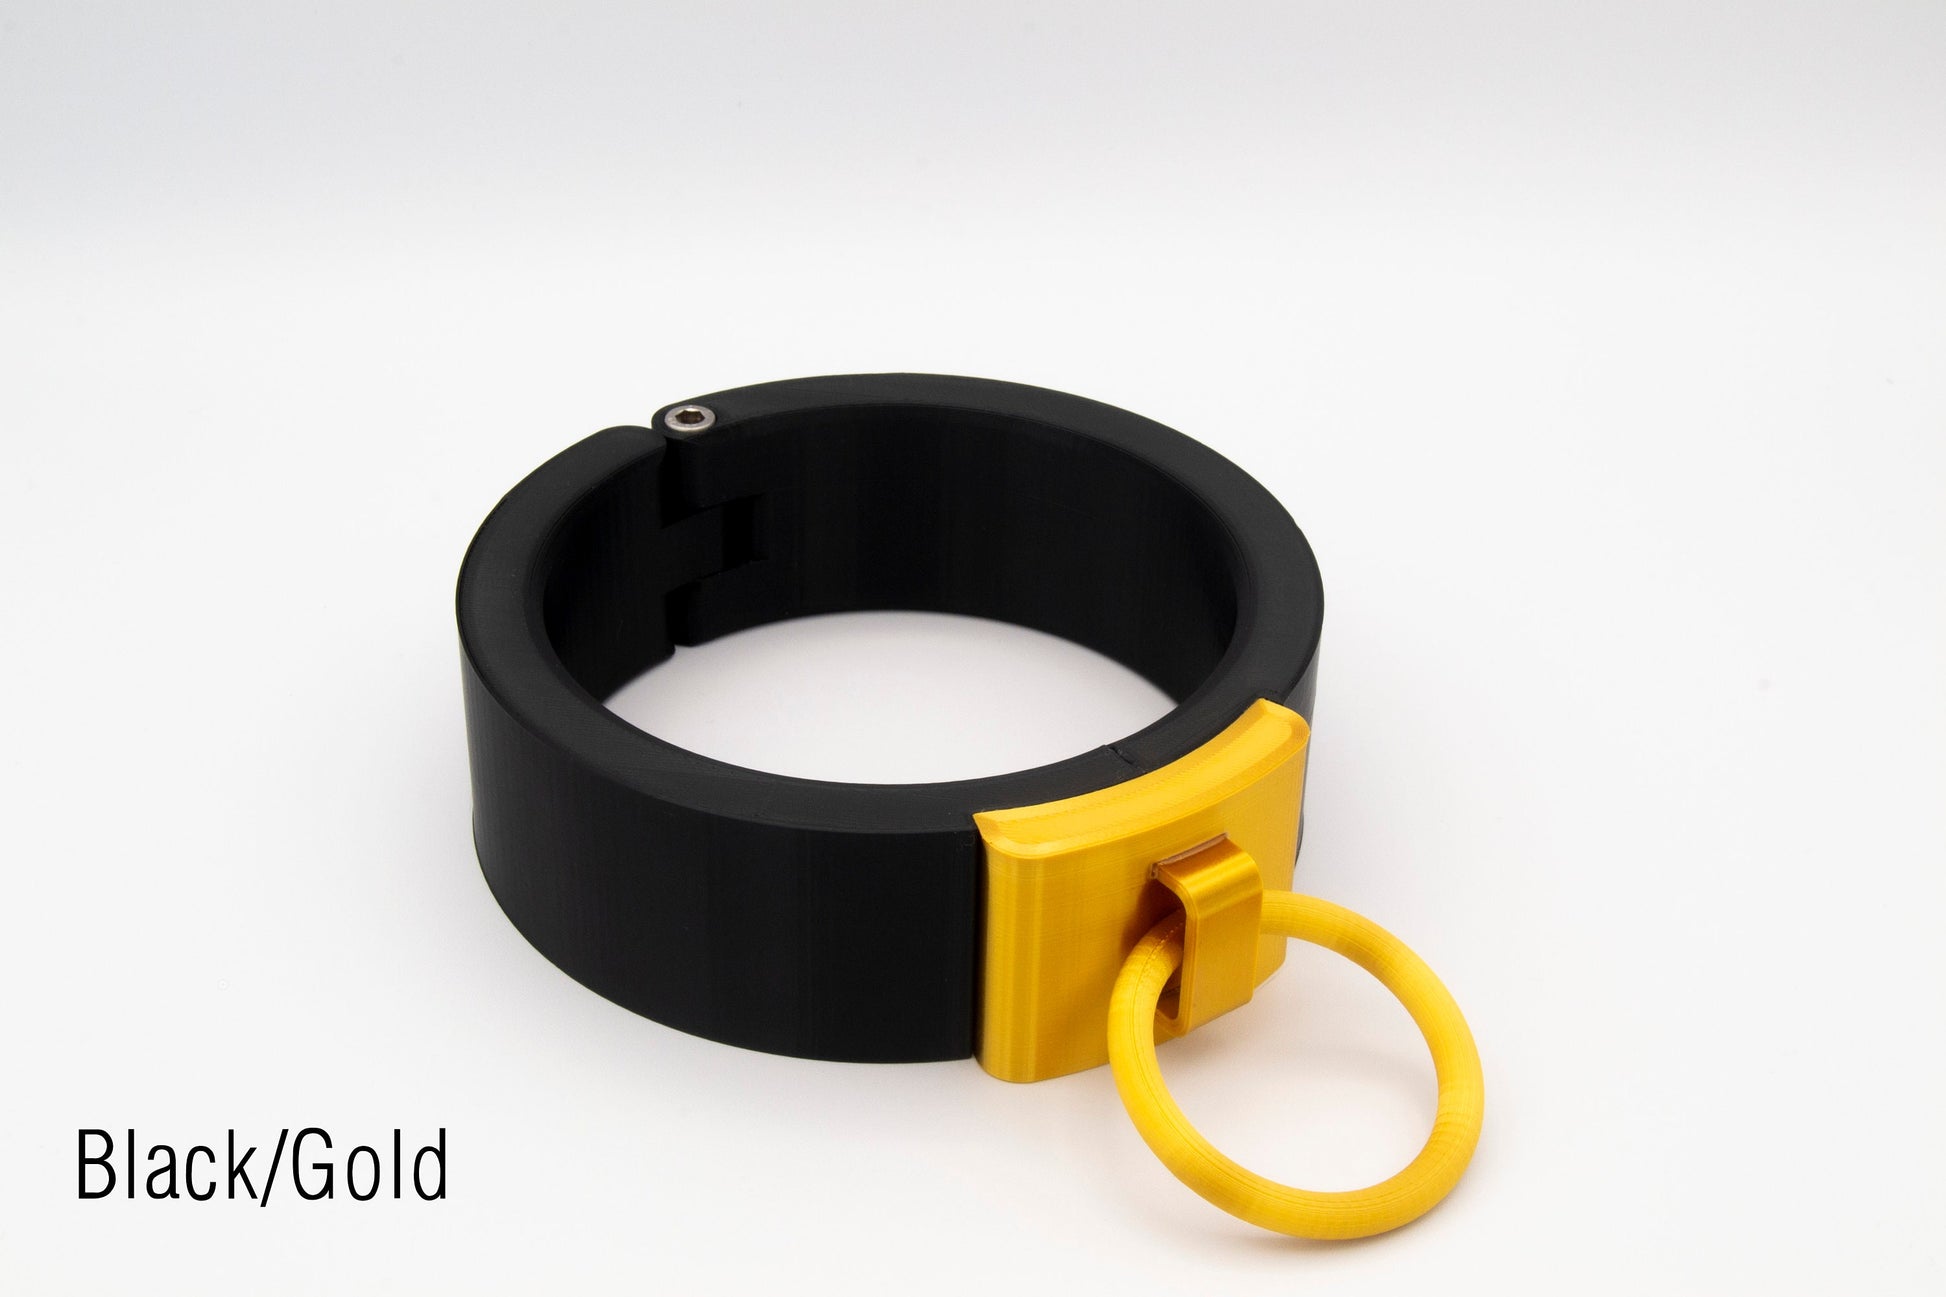 sleek nordic collar featuring a golden fastener with a ring